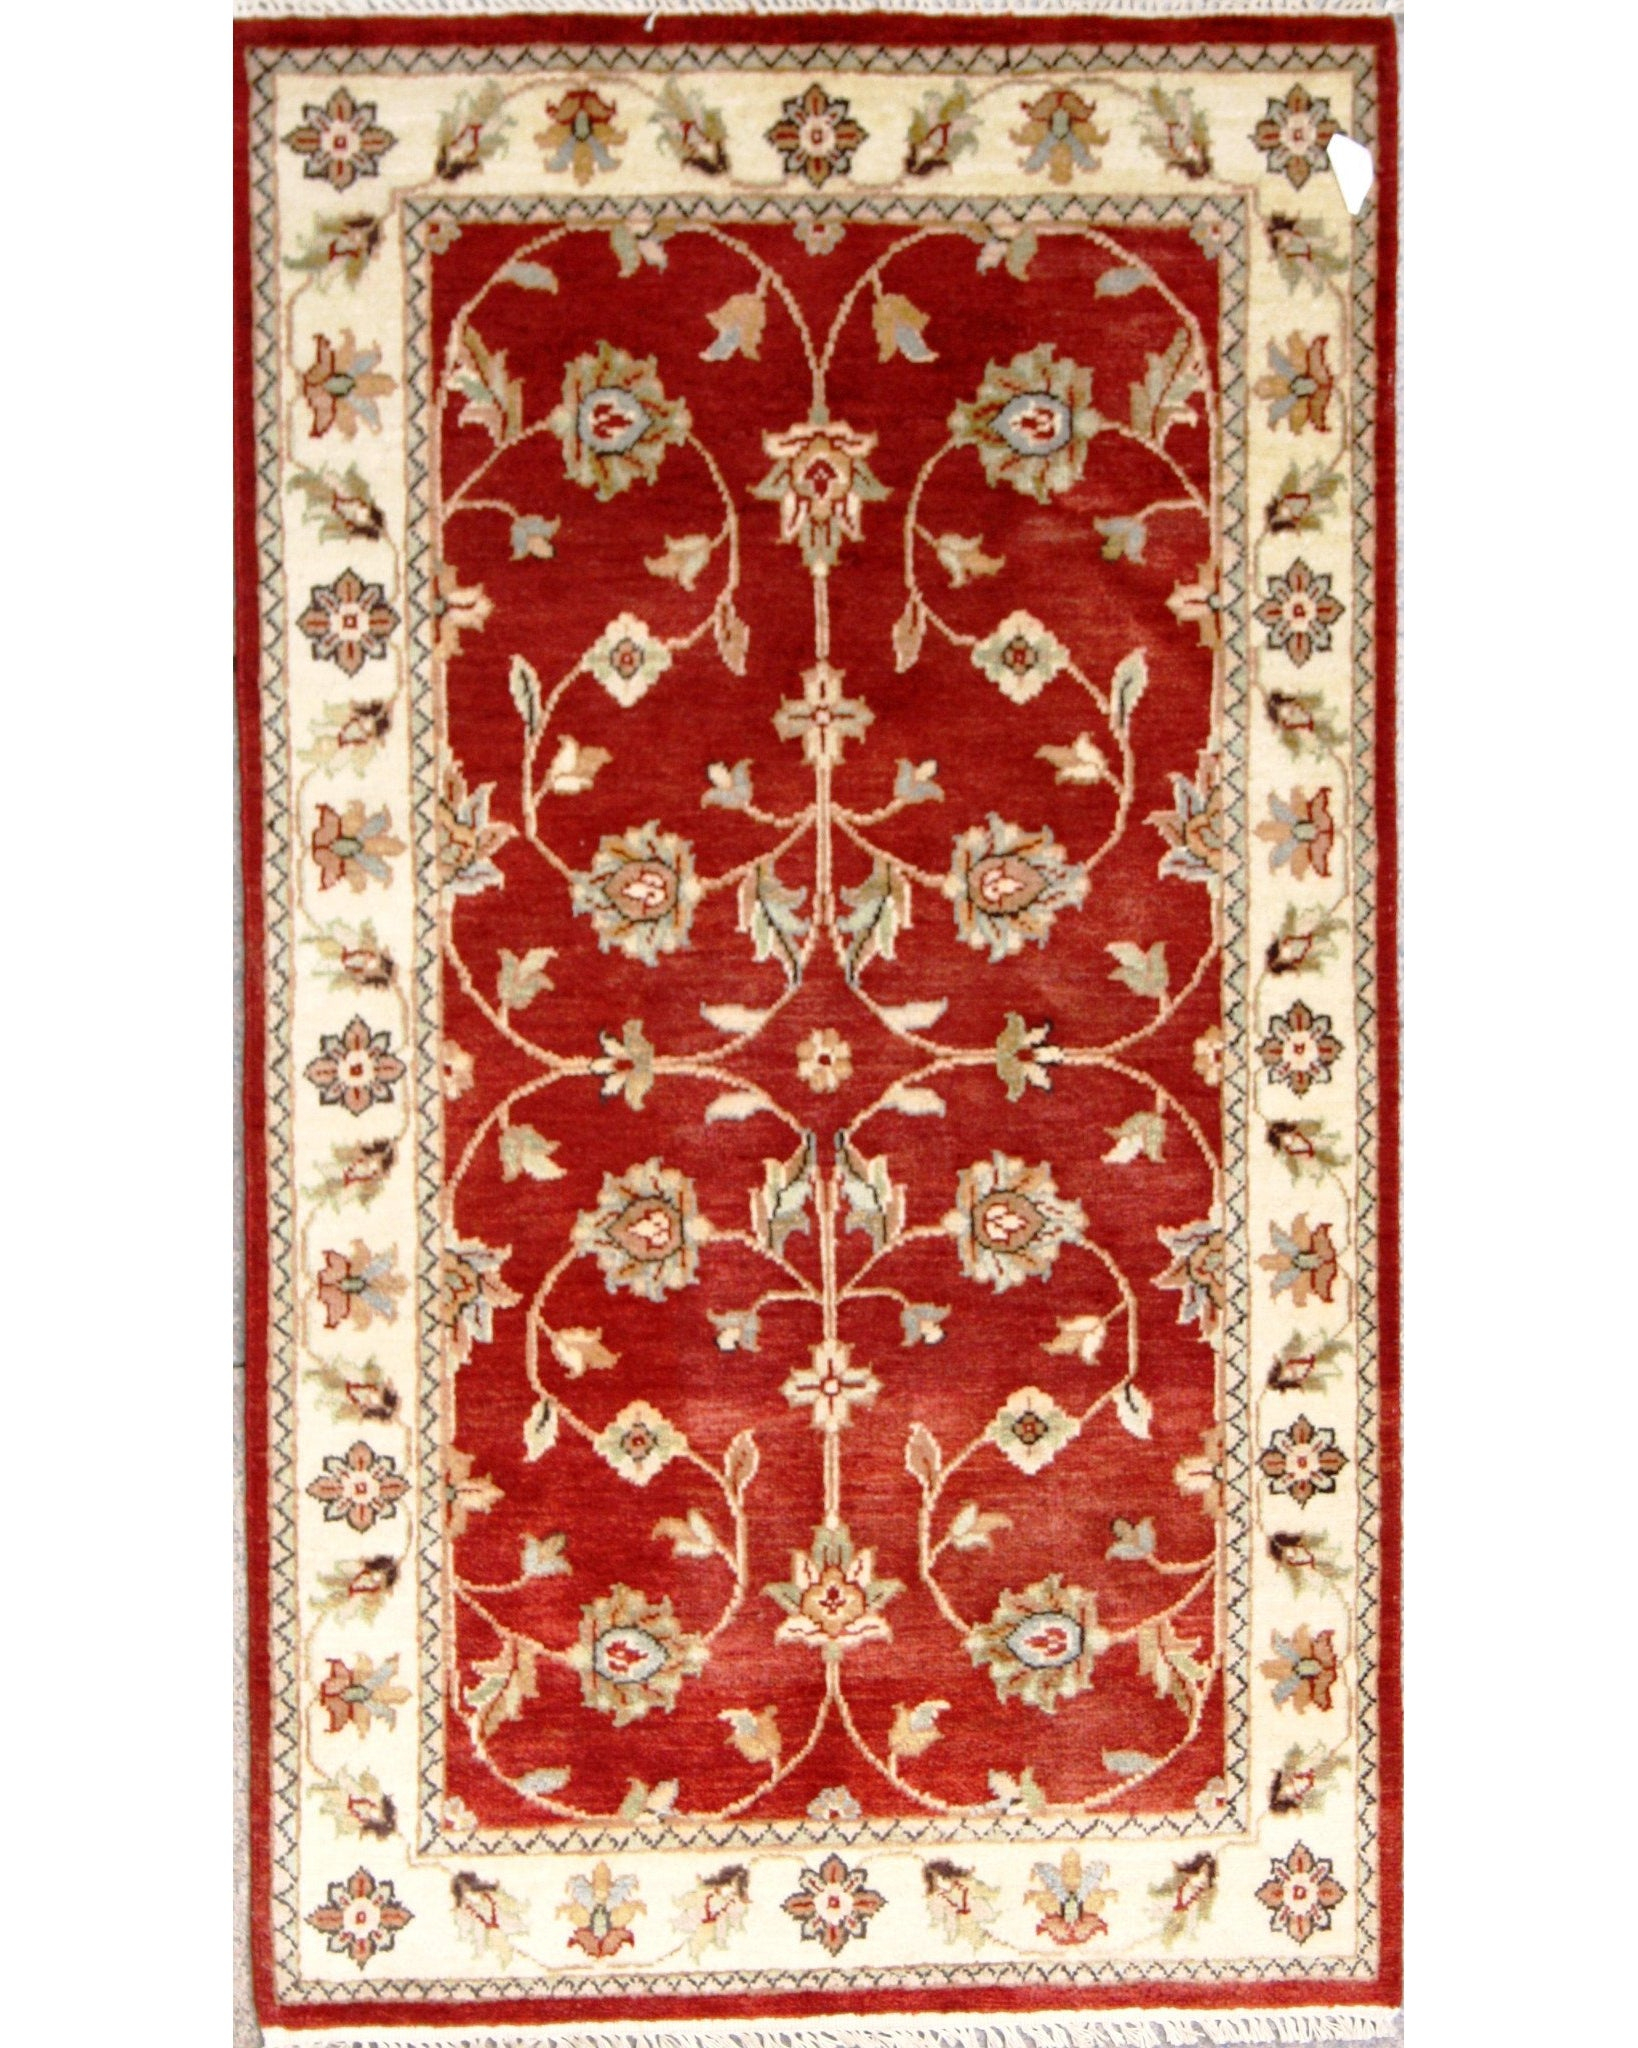 Area rug for living space and any room. Floor decor, rugs and carpets from Tabrizi Rugs. Himalaya 3'0